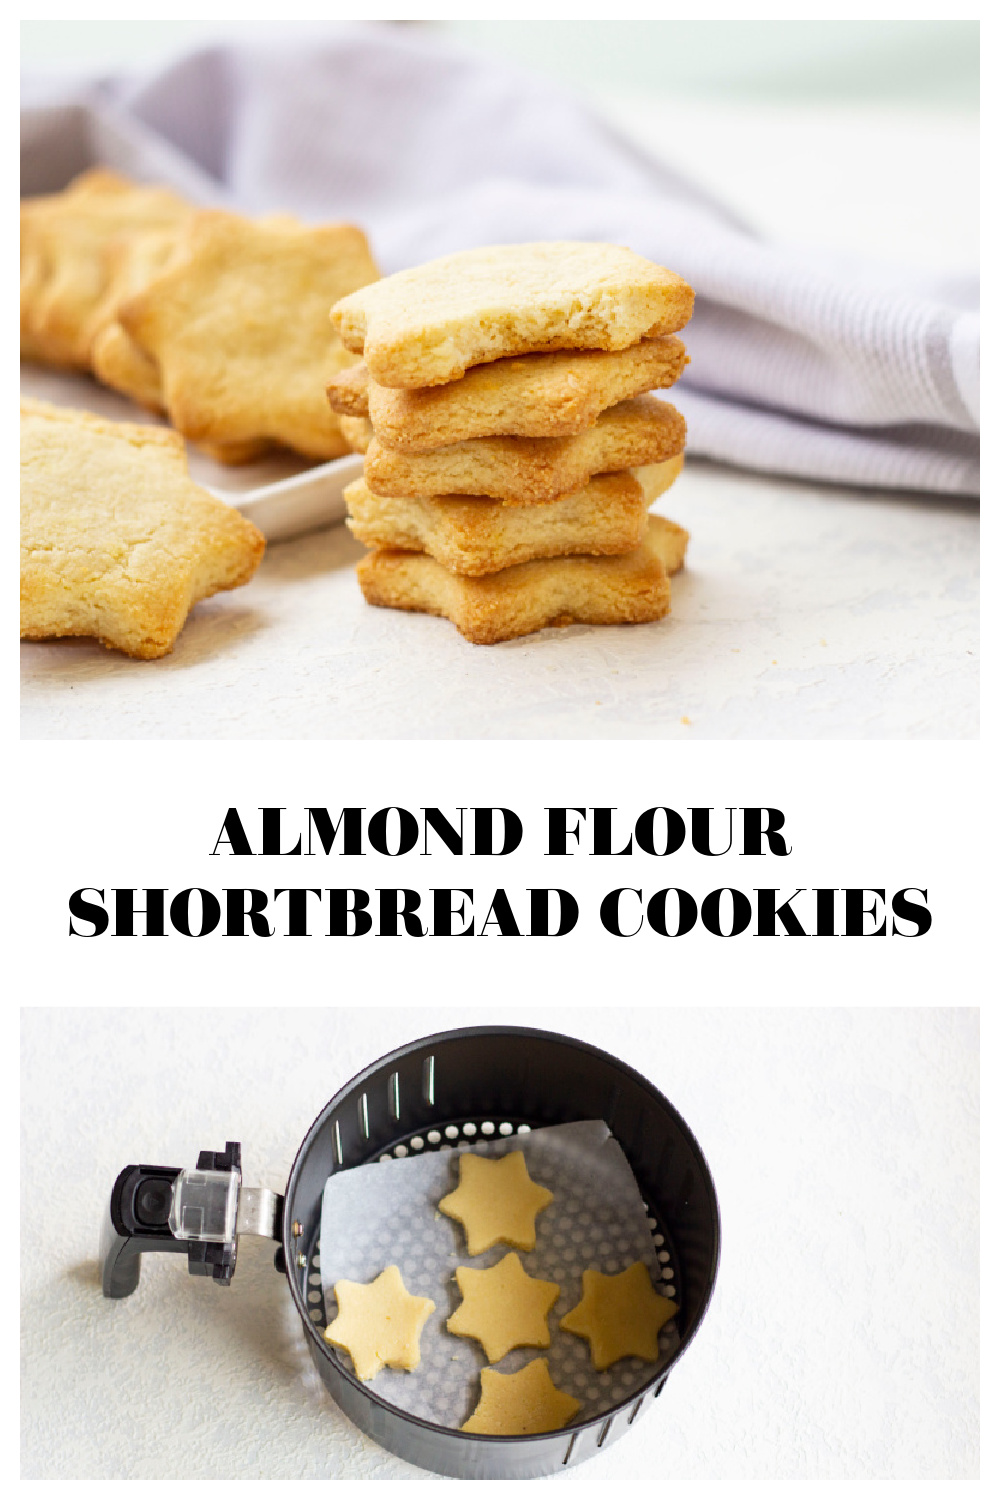 These almond flour shortbread cookies are a delicious gluten free shortbread with a delicately nutty flavor. Make my favorite almond flour cookies today.